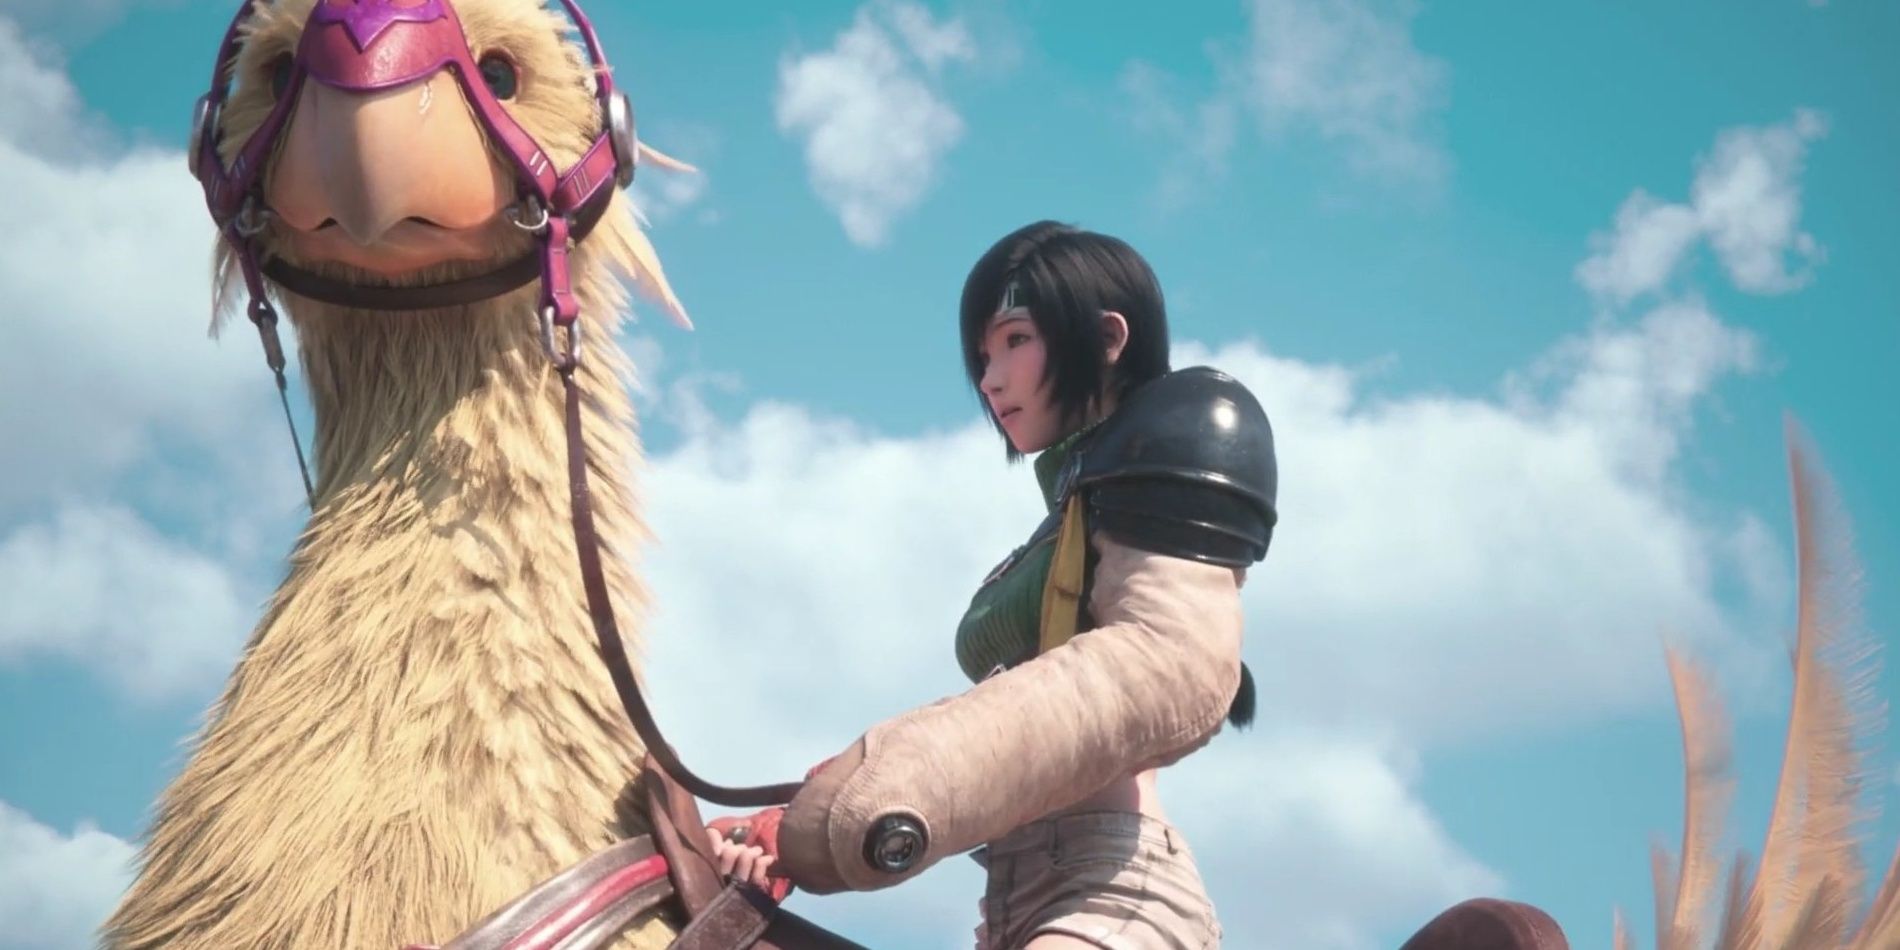 Yuffie and a chocobo in Final Fantasy VII Remake Intermission